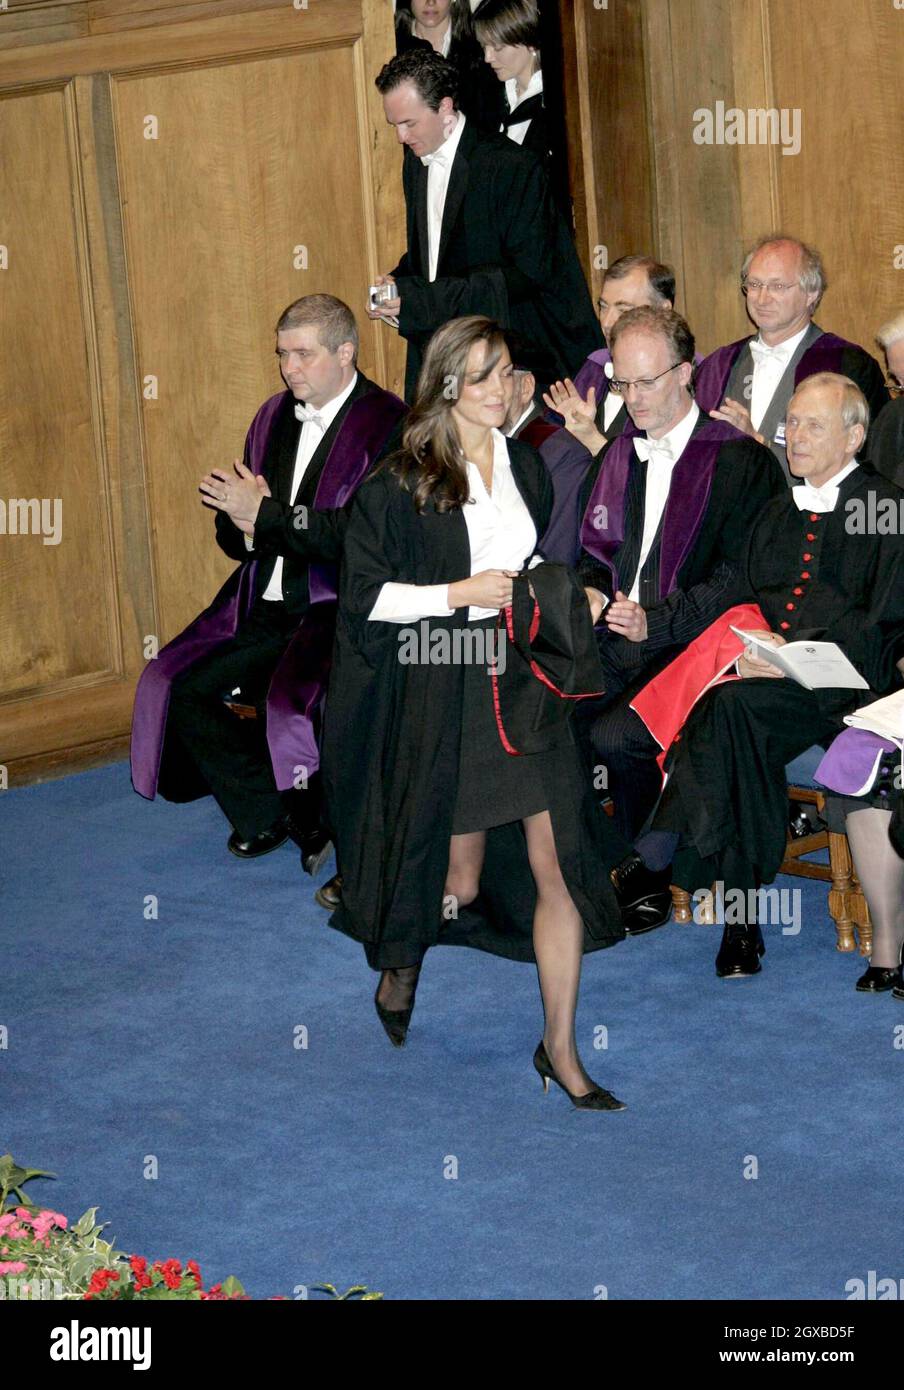 Kate Middleton, girlfriend of Prince William, during their graduation ceremony at St Andrews, Thursday June 23, 2005. William got a 2:1 in geography after four years studying for his Master of Arts.  Anwar Hussein/allactiondigital.com  Stock Photo